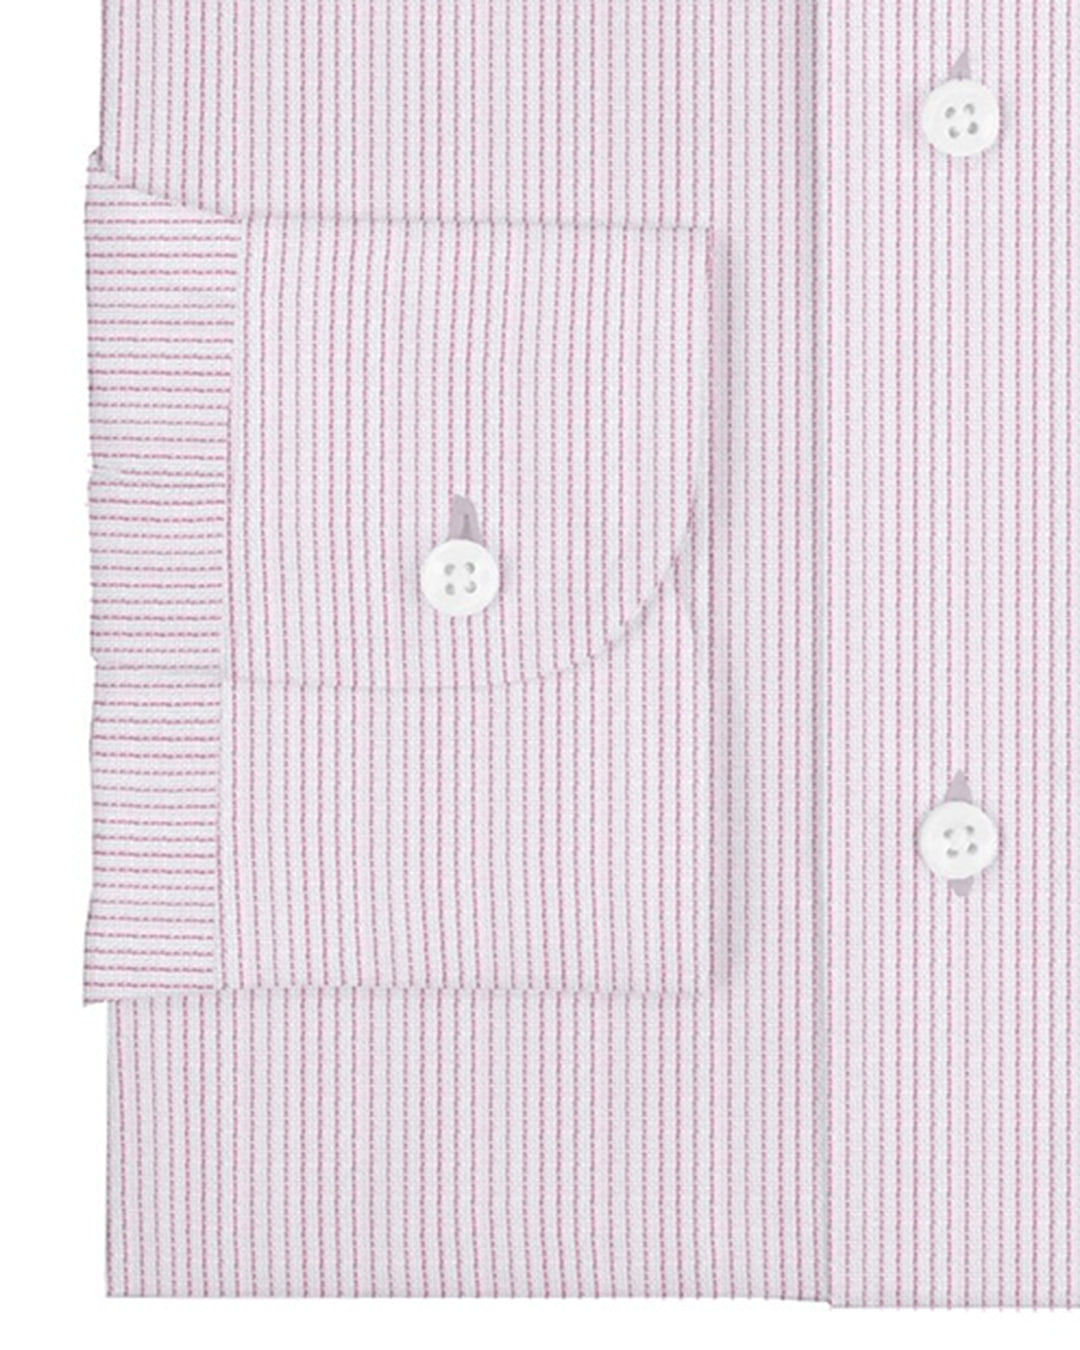 Cuff of the custom linen shirt for men in white with light pink stripes by Luxire Clothing